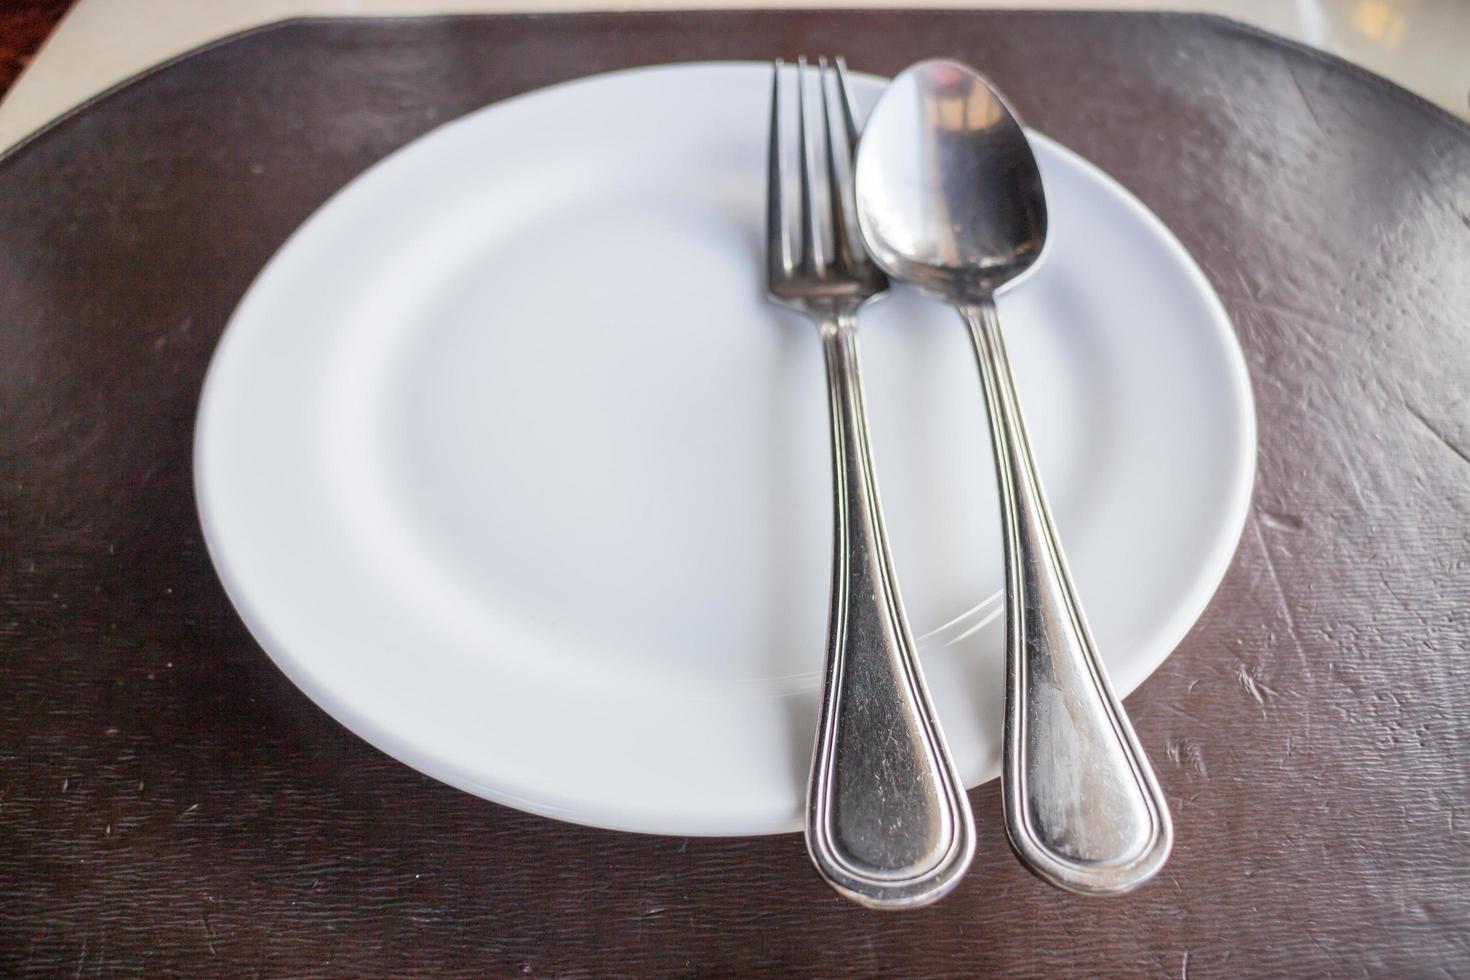 Top view of a white plate with a spoon and a fork photo